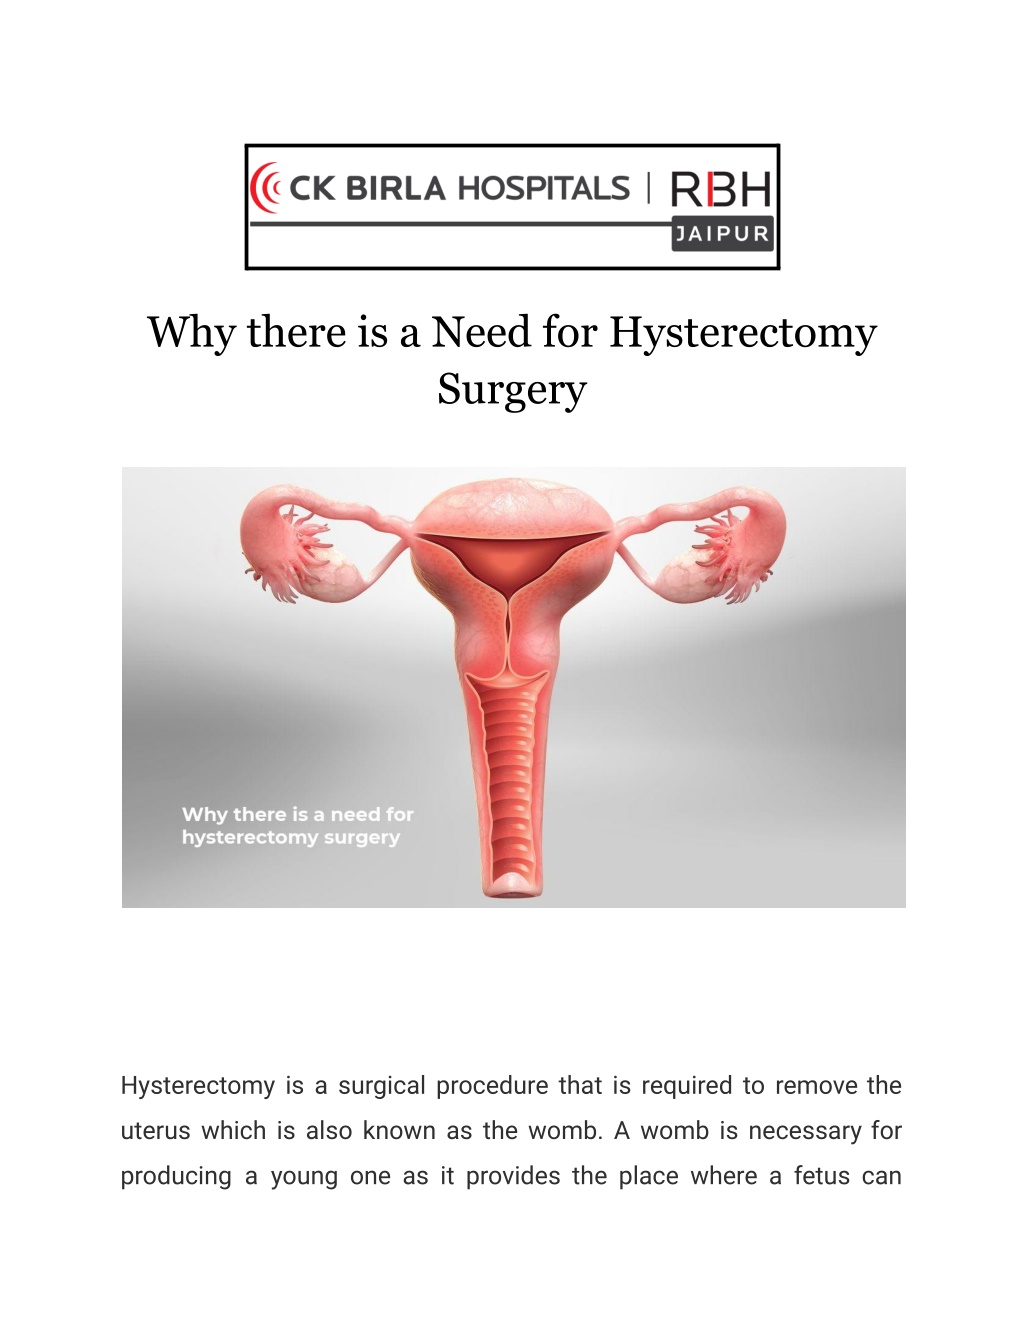 Ppt Why There Is A Need For Hysterectomy Surgery Powerpoint Presentation Id11022253